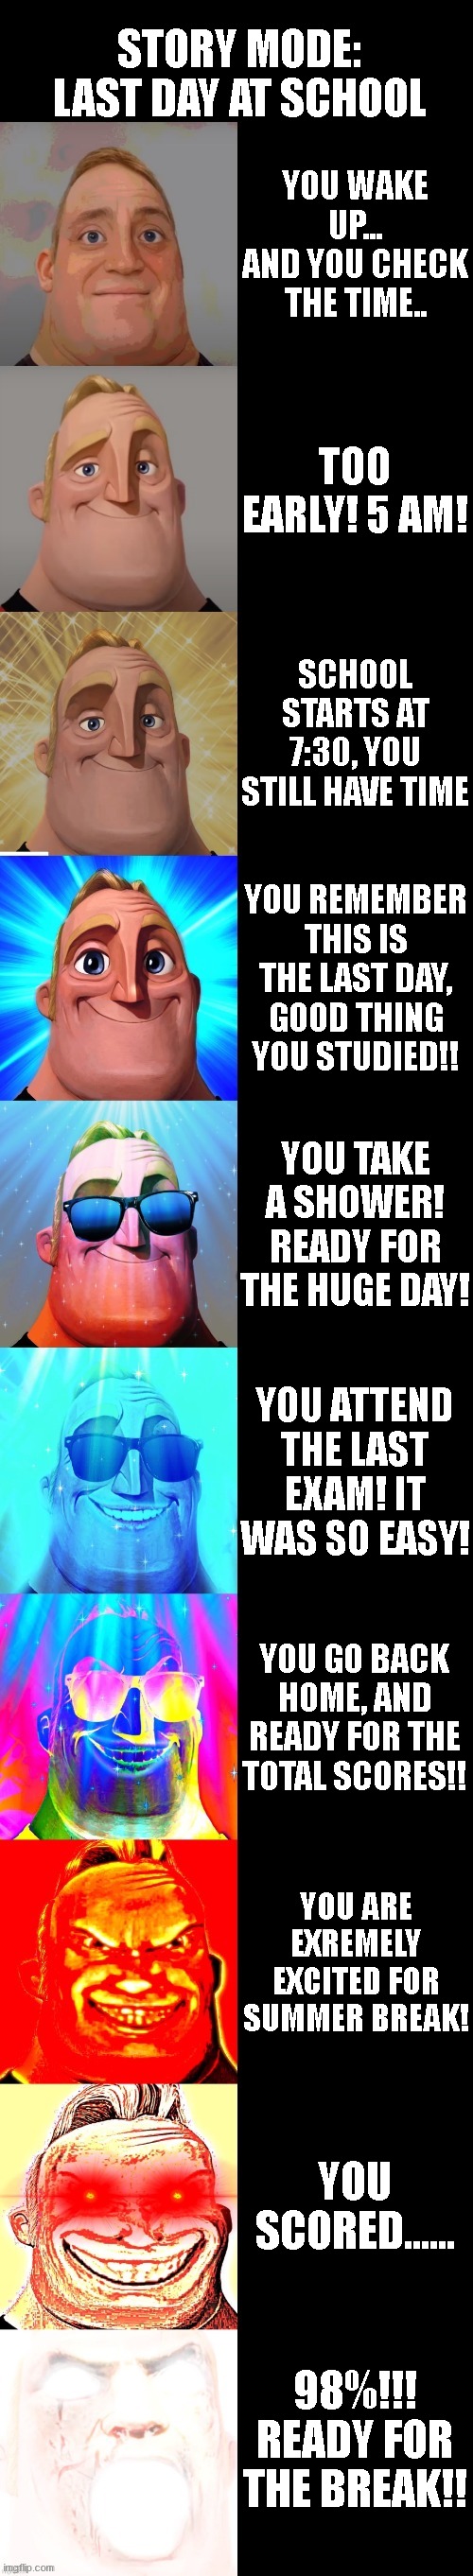 Mr Incredible becoming canny story mode (Quick) Your last day at school | STORY MODE: LAST DAY AT SCHOOL; YOU WAKE UP... AND YOU CHECK THE TIME.. TOO EARLY! 5 AM! SCHOOL STARTS AT 7:30, YOU STILL HAVE TIME; YOU REMEMBER THIS IS THE LAST DAY, GOOD THING YOU STUDIED!! YOU TAKE A SHOWER! READY FOR THE HUGE DAY! YOU ATTEND THE LAST EXAM! IT WAS SO EASY! YOU GO BACK HOME, AND READY FOR THE TOTAL SCORES!! YOU ARE EXREMELY EXCITED FOR SUMMER BREAK! YOU SCORED...... 98%!!! READY FOR THE BREAK!! | image tagged in mr incredible becoming canny | made w/ Imgflip meme maker